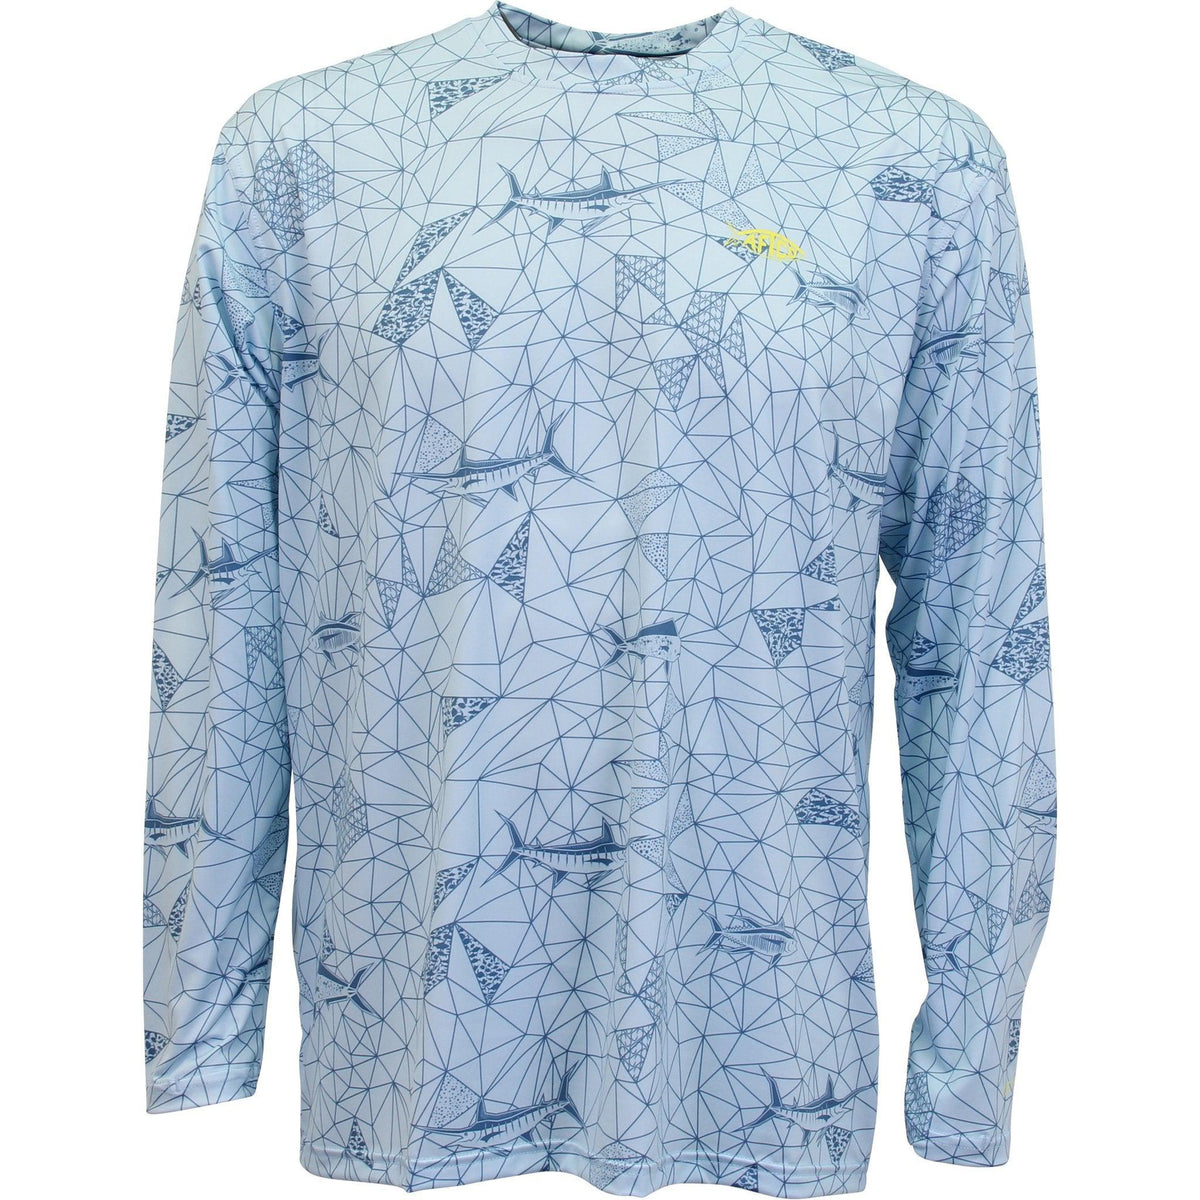 AFTCO Youth Meisai LS Shirt